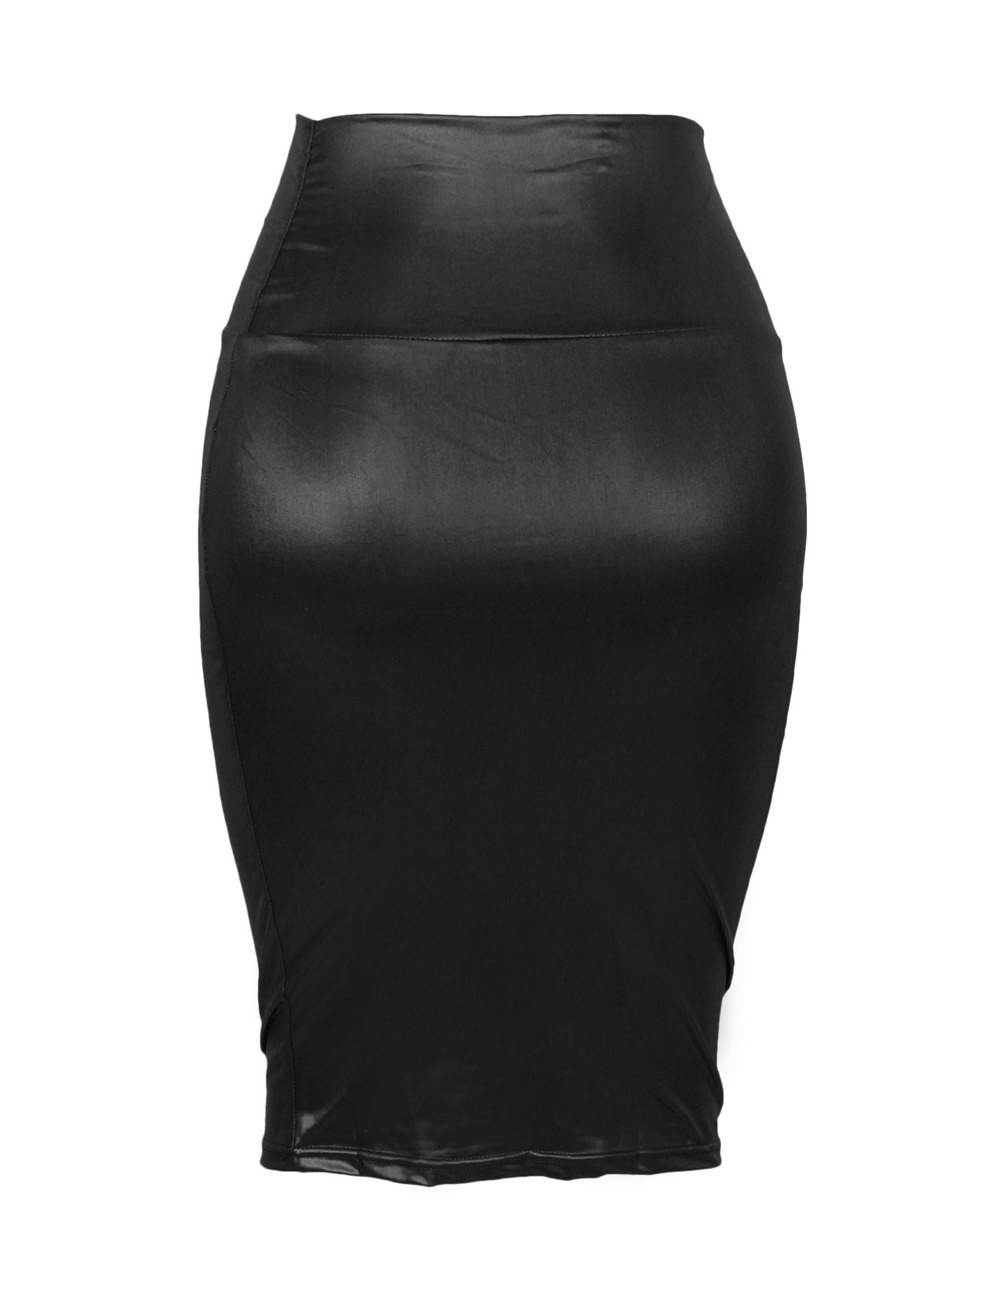 Hot Sale wholesale skirts,cheap sexy skirts,black sexy skirts for women ...